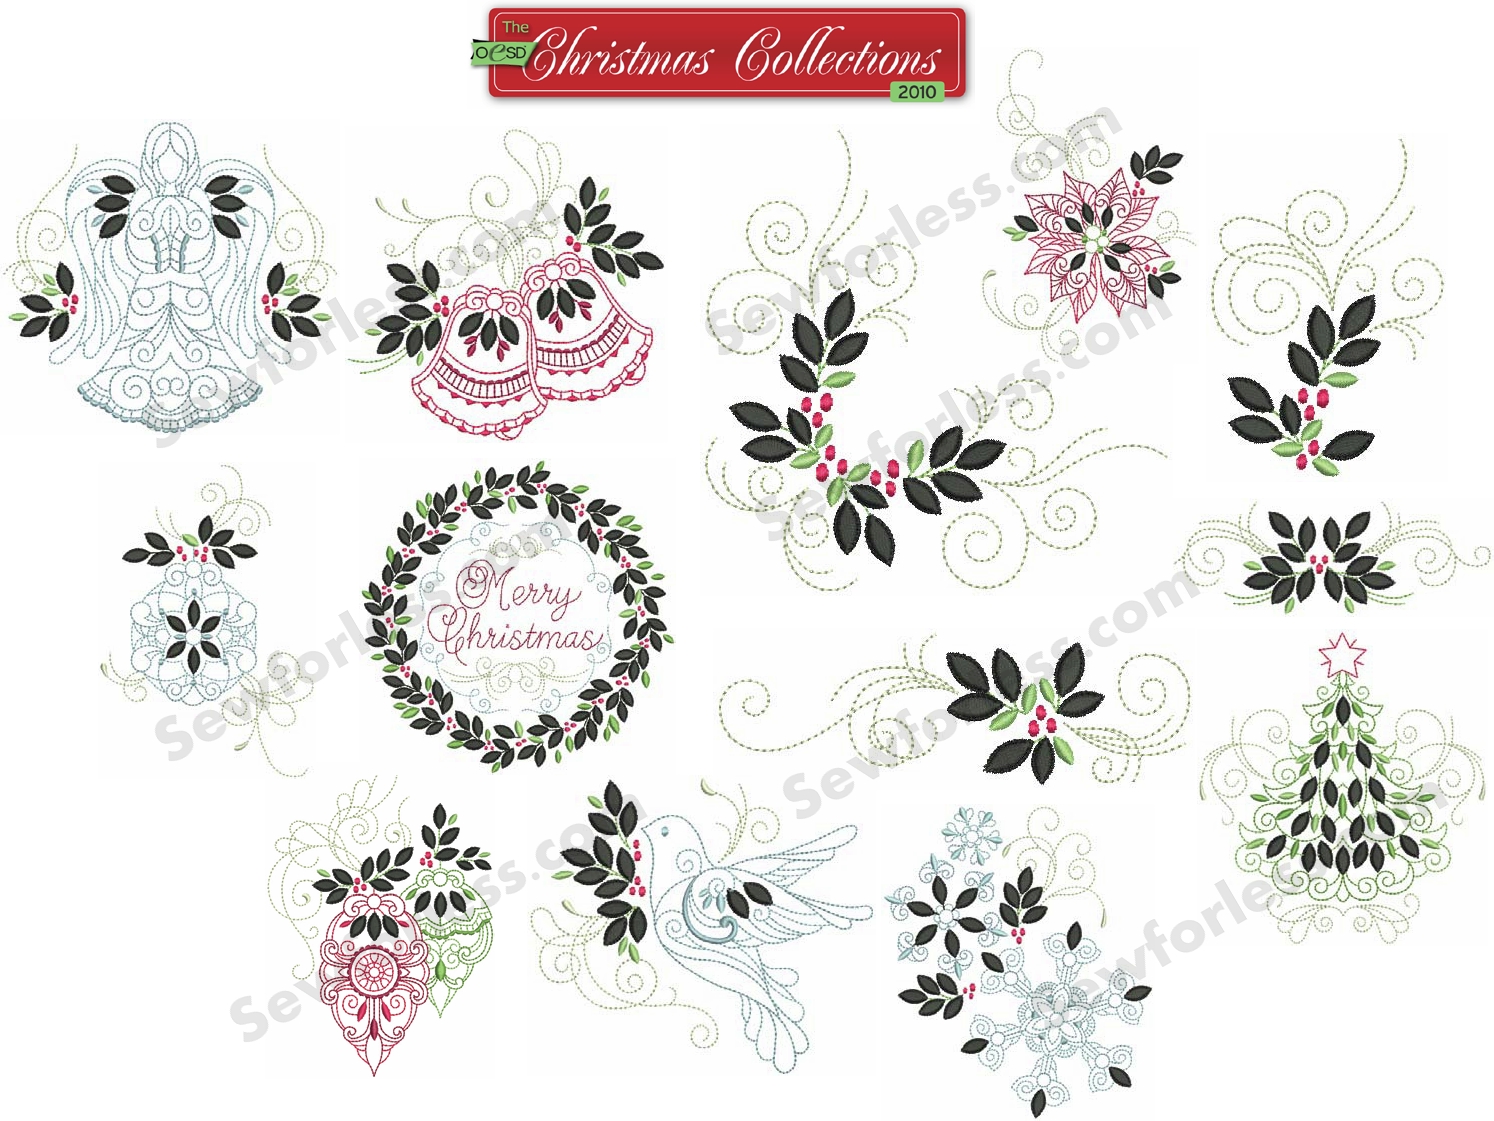 The OESD Christmas Collection 2010 - Collection Three Embroidery Designs on a Multi-Format CD-ROM CLOSEOUT